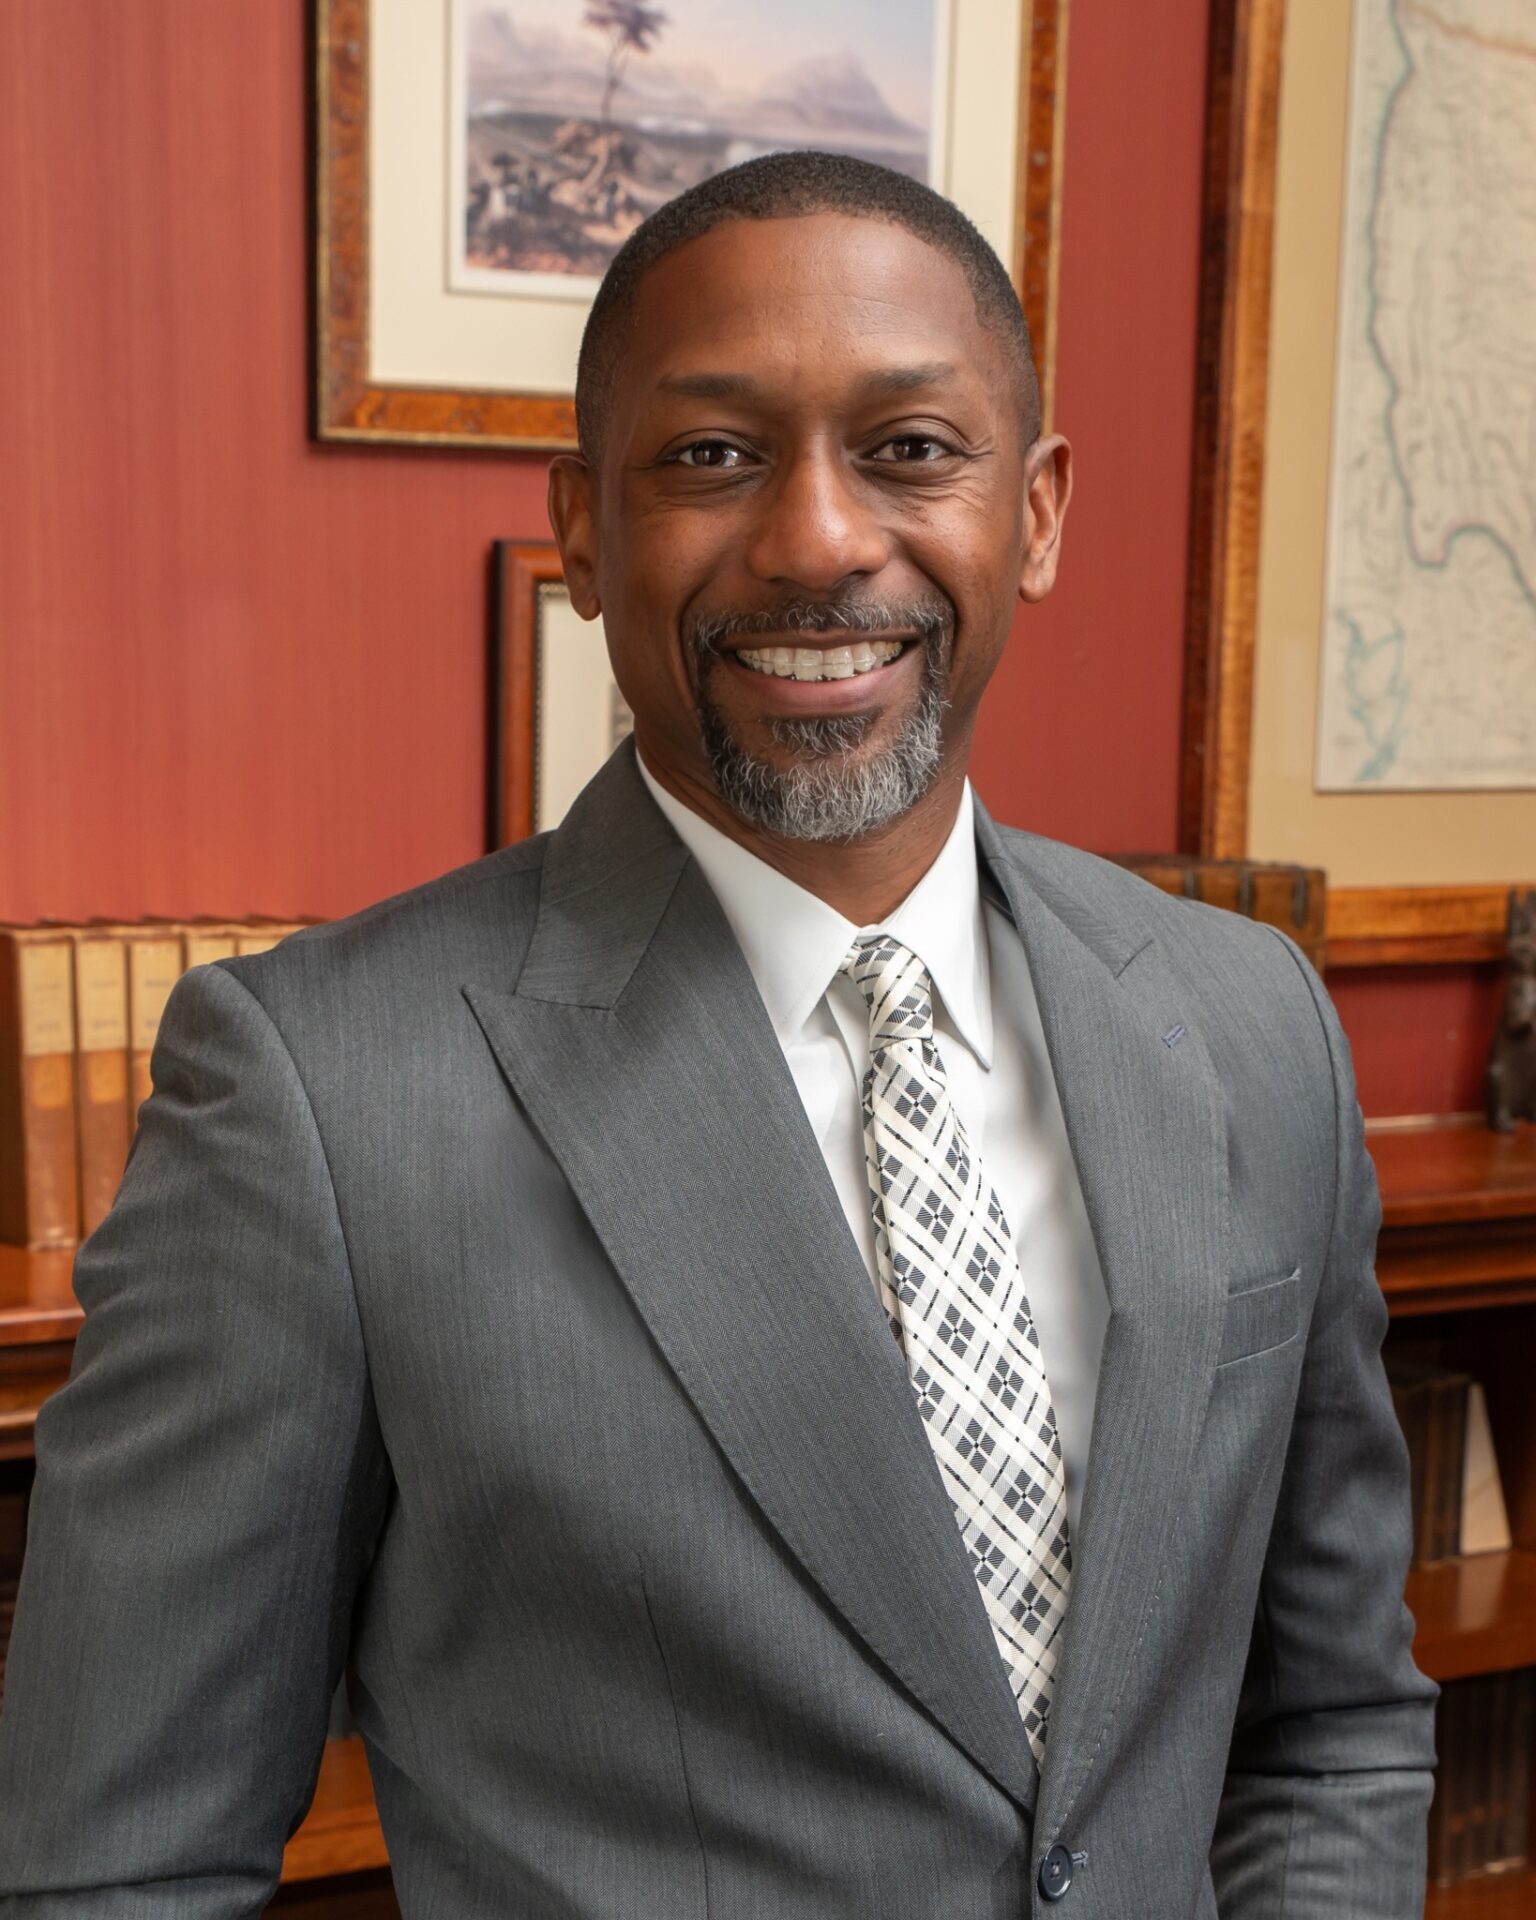 Jeff Postell, Jr. is President, CEO of Post L Group